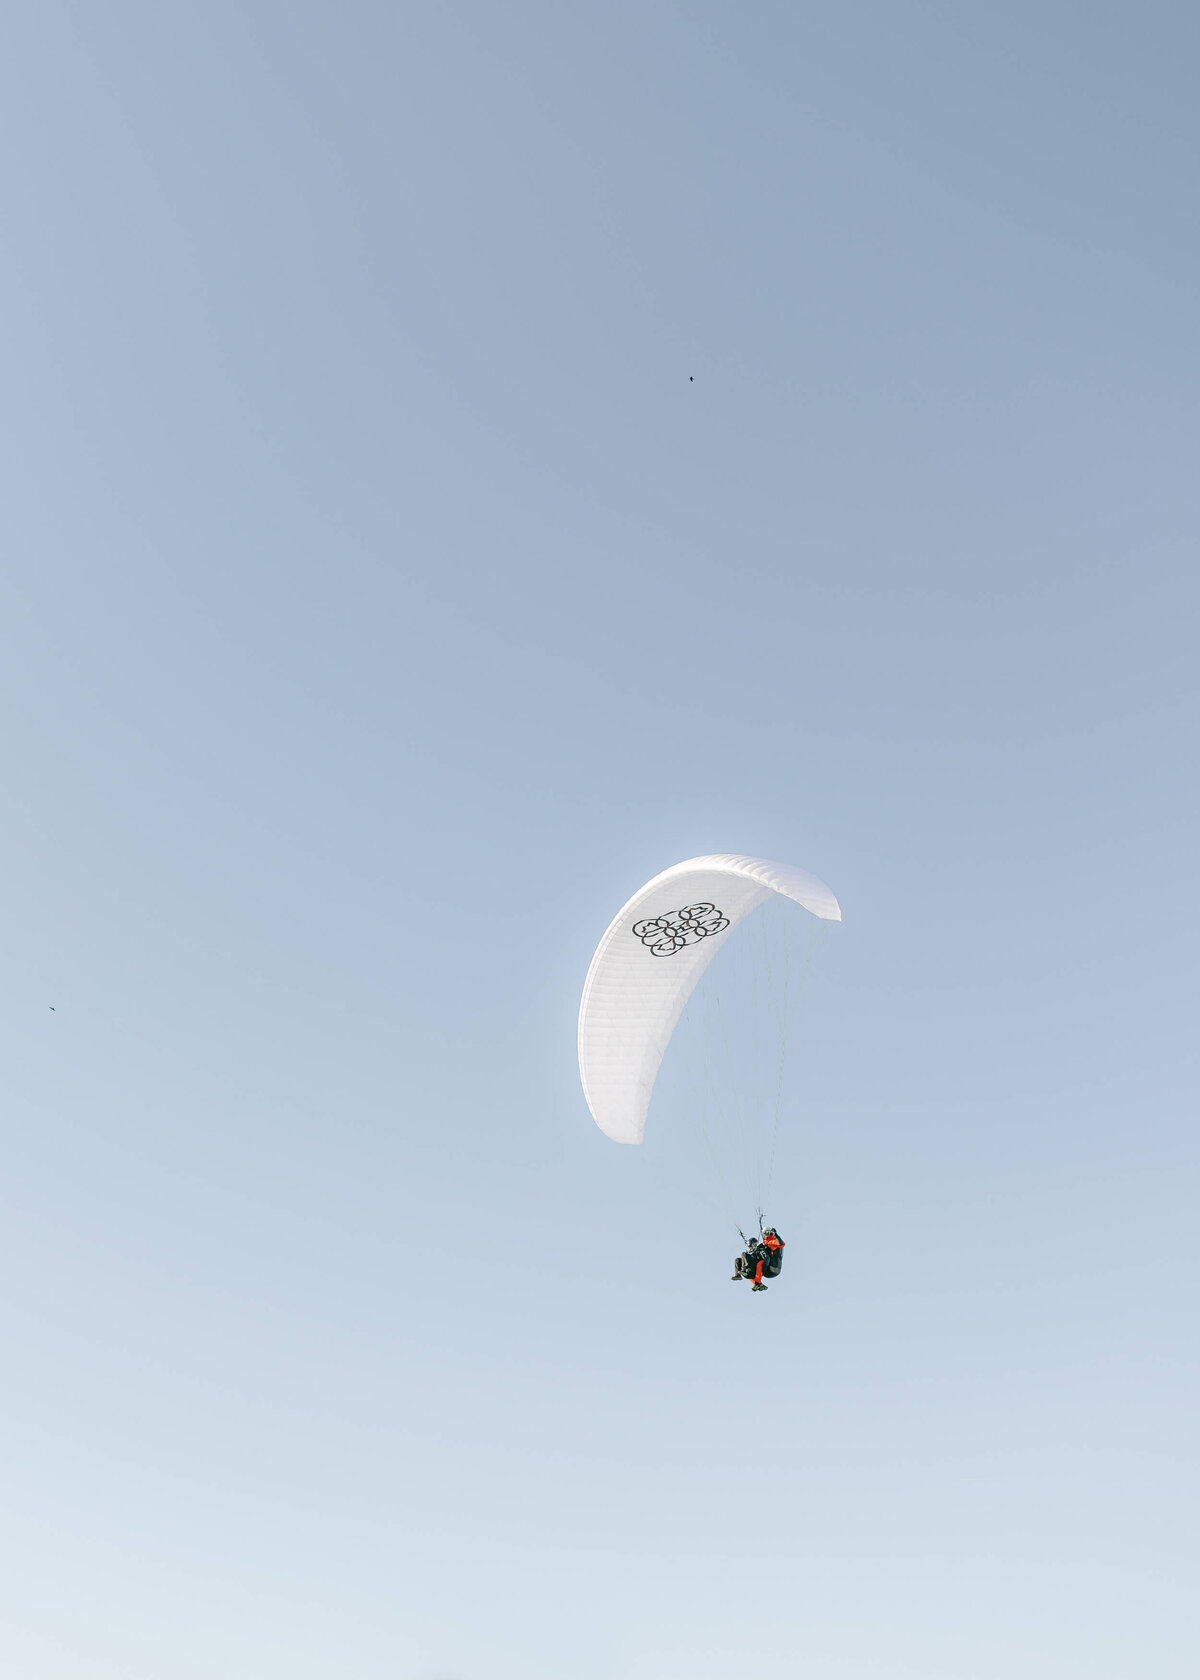 chloe-winstanley-events-gstaad-tandem-paragliding